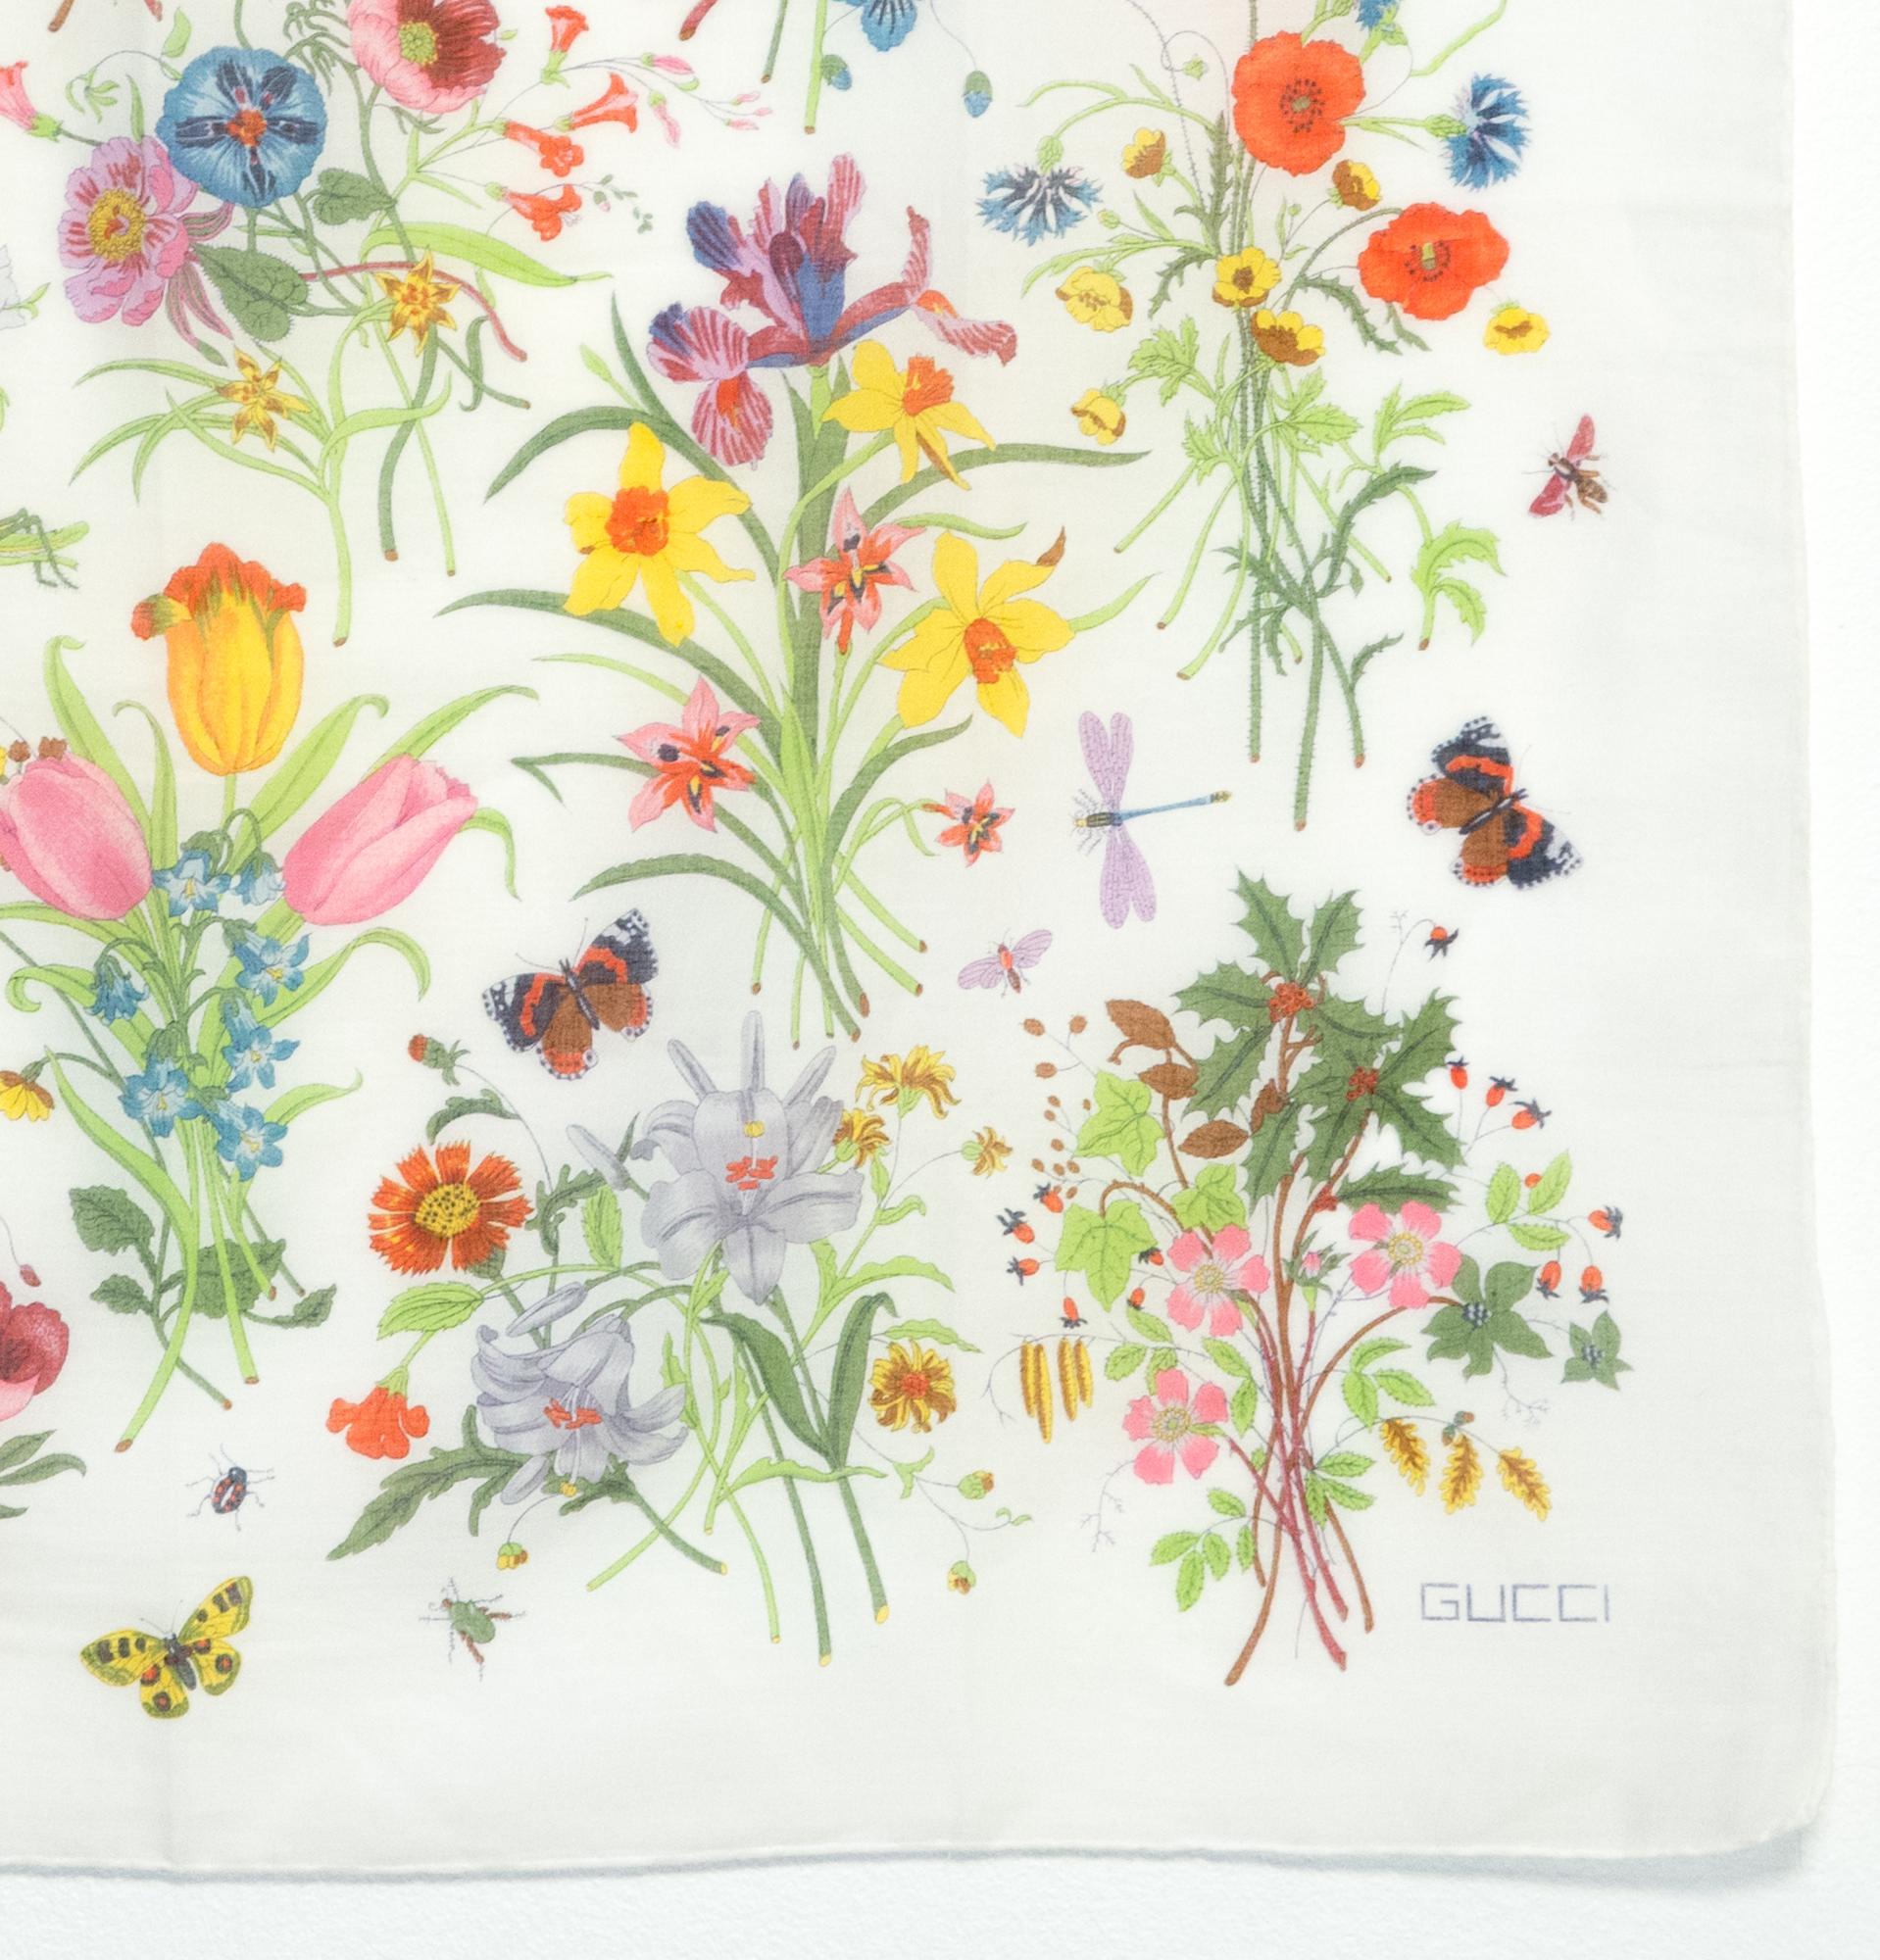 gucci floral scarf grace kelly